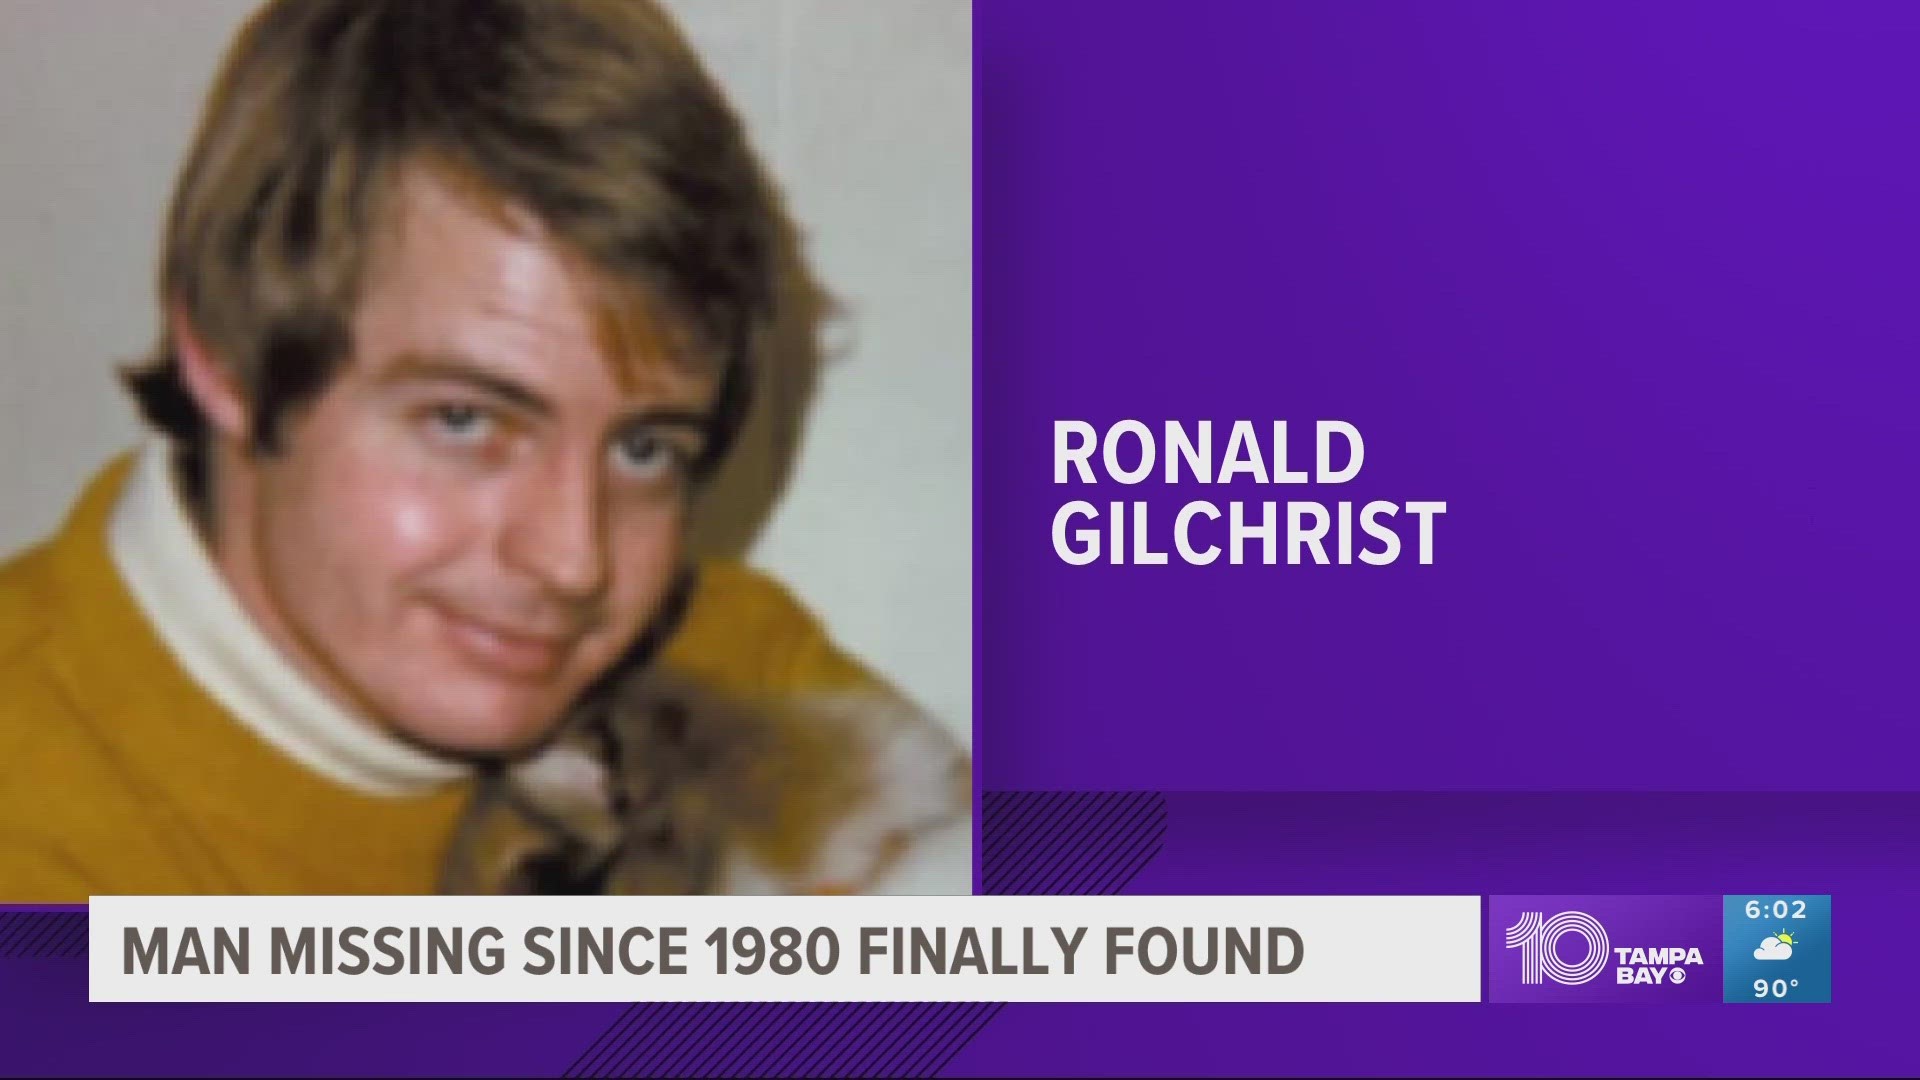 On Oct. 28, 1980, then-29-year-old Ronald Gilchrist left a home in Clearwater. His destination — Miami.